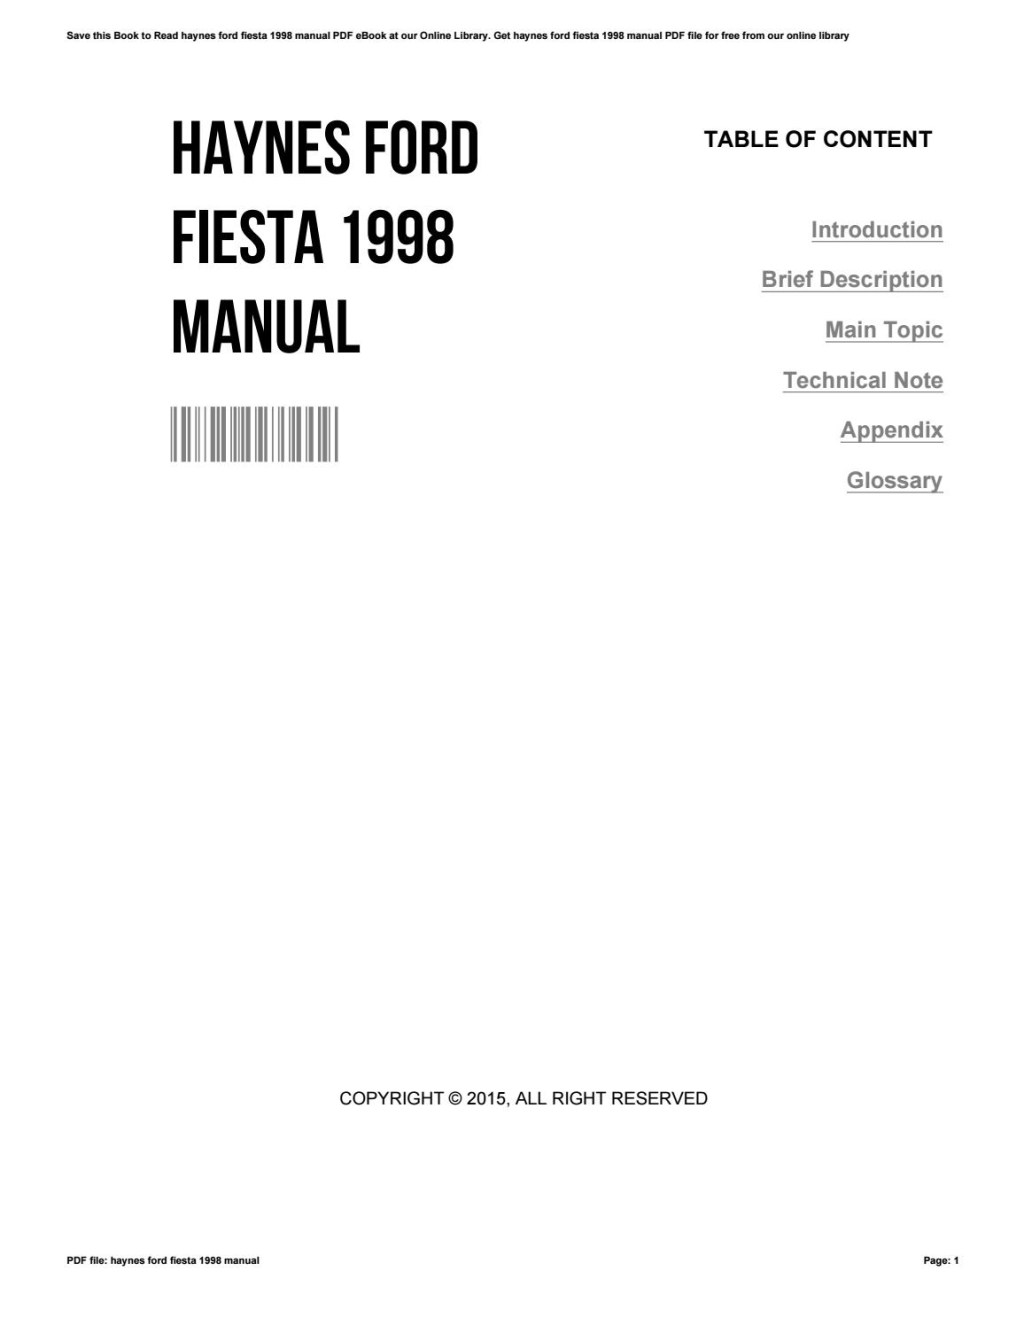 Picture of: Haynes ford fiesta  manual by ArthurSlater – Issuu